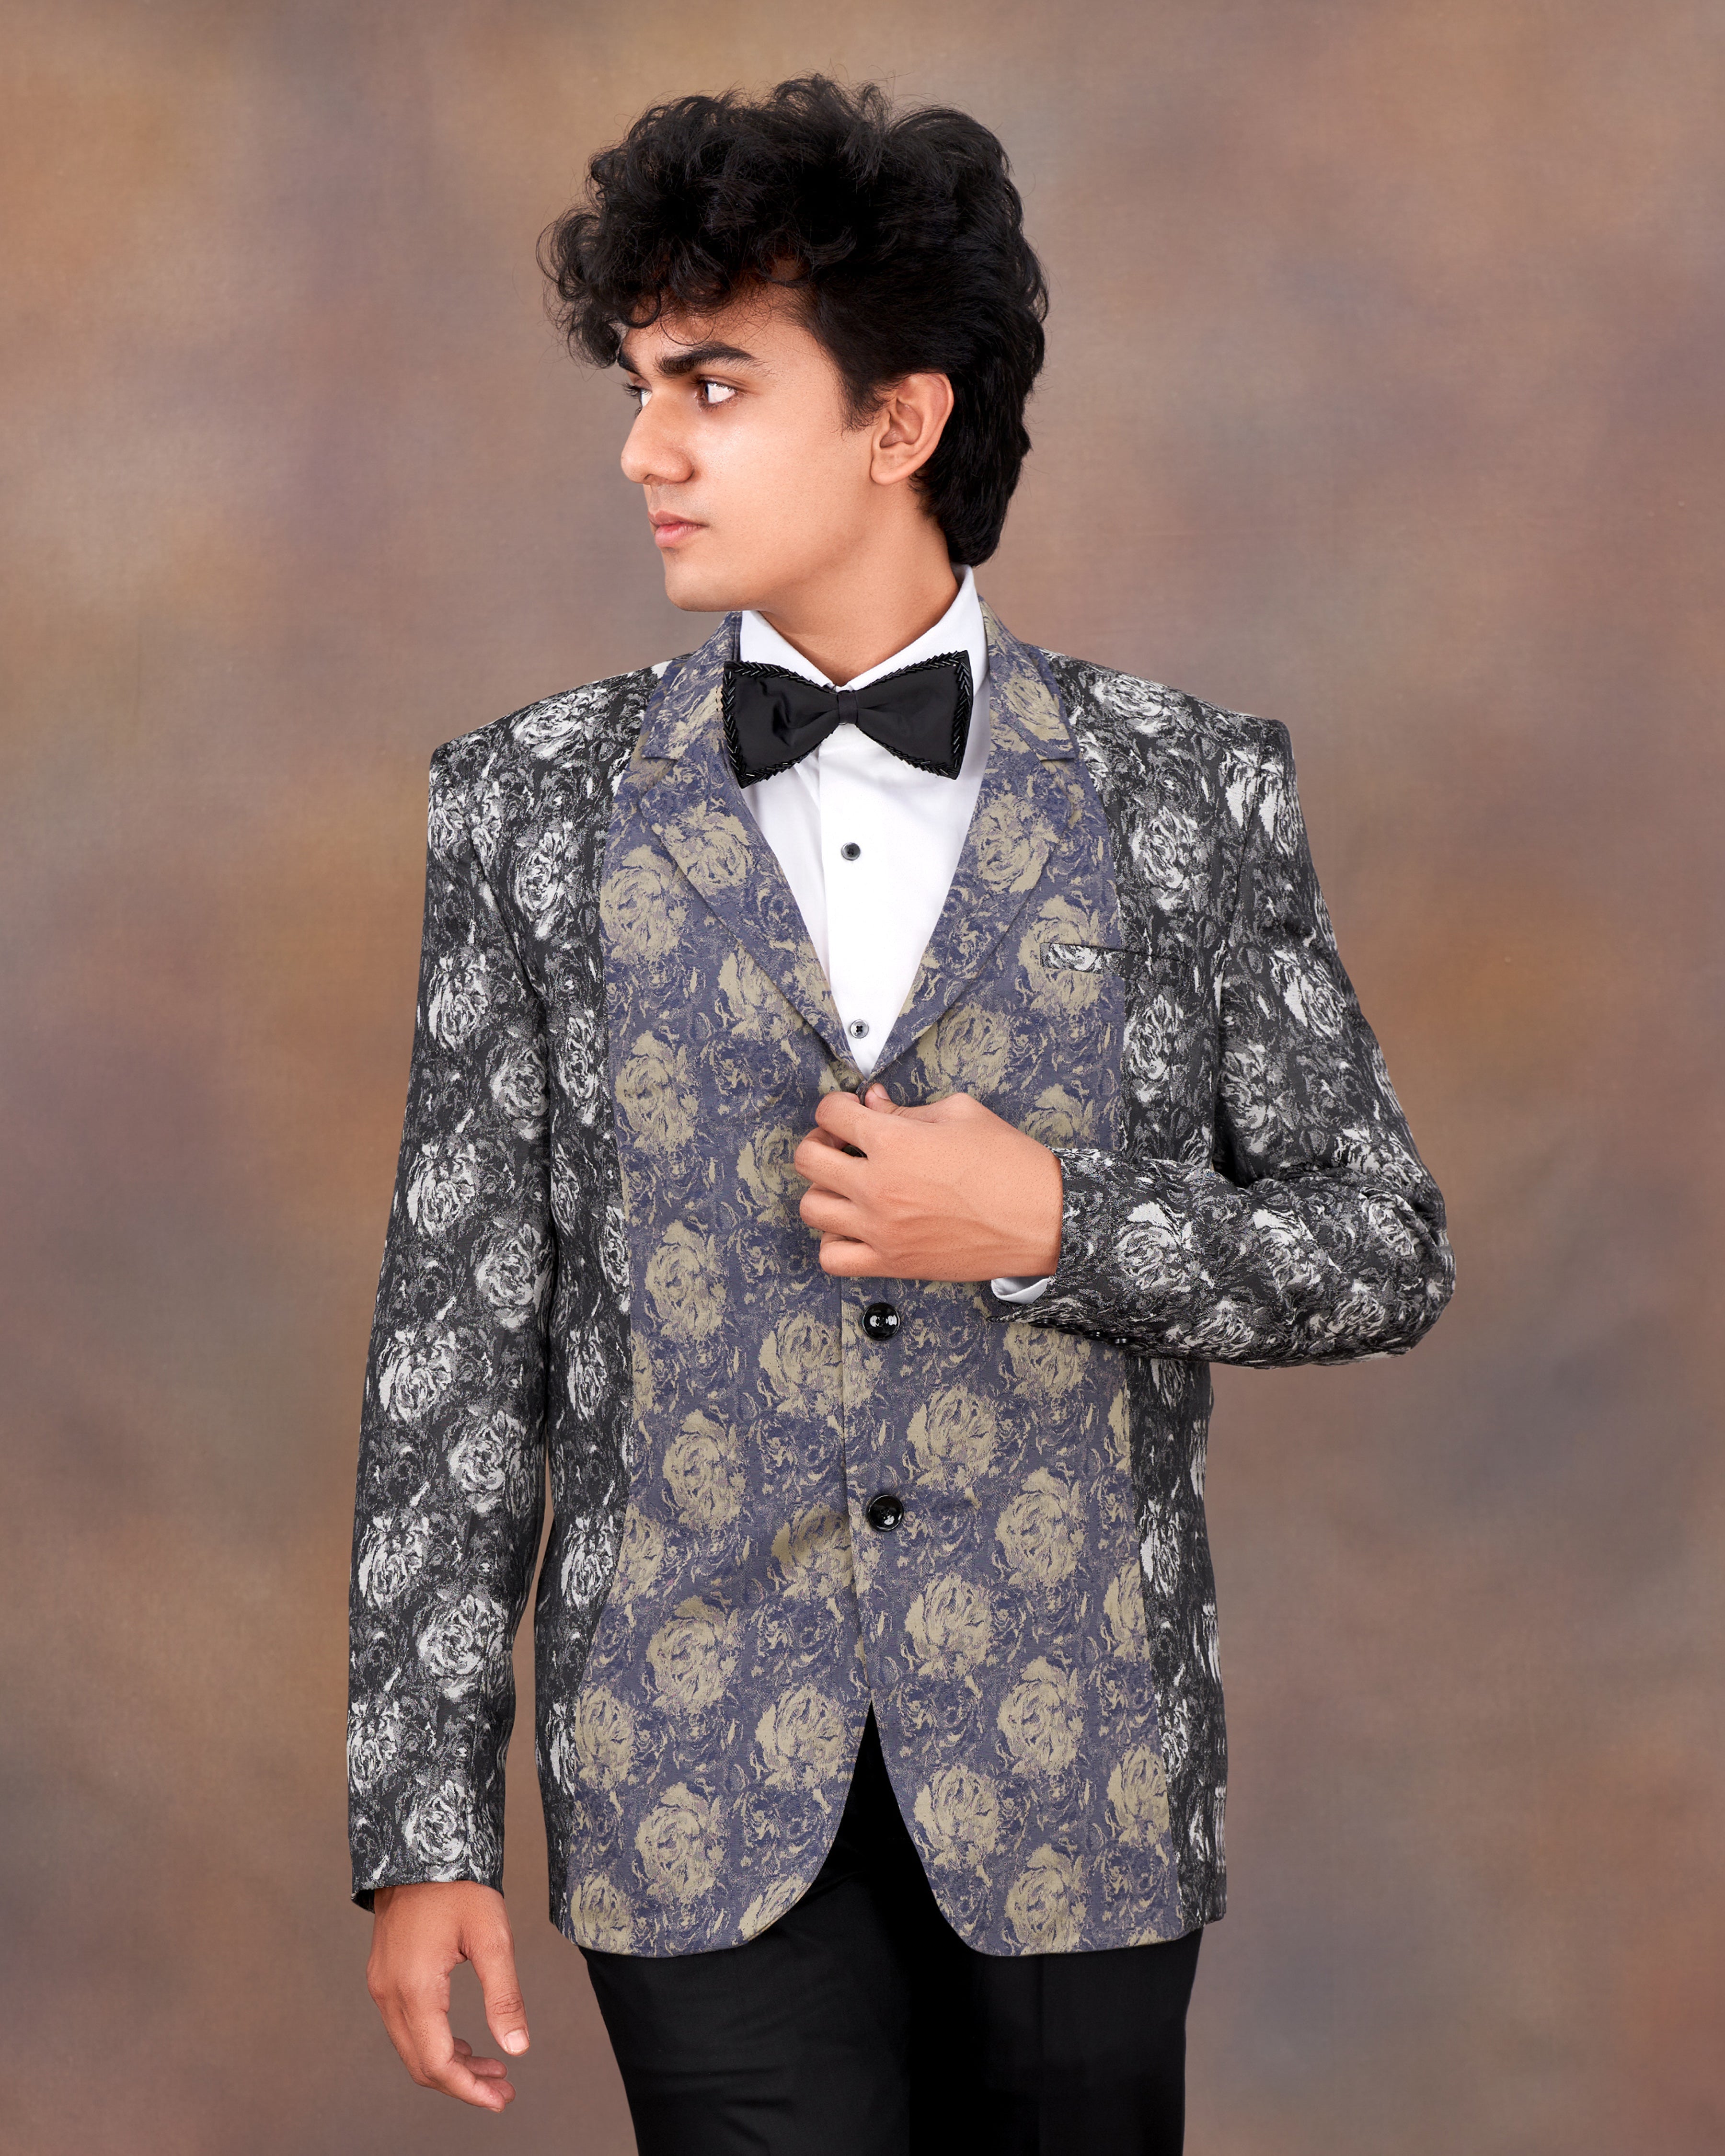 Charcoal Gray with Blue Jacquard Textured Designer Blazer BL2337-SB-D213-36, BL2337-SB-D213-38, BL2337-SB-D213-40, BL2337-SB-D213-42, BL2337-SB-D213-44, BL2337-SB-D213-46, BL2337-SB-D213-48, BL2337-SB-D213-50, BL2337-SB-D213-52, BL2337-SB-D213-54, BL2337-SB-D213-56, BL2337-SB-D213-58, BL2337-SB-D213-60	